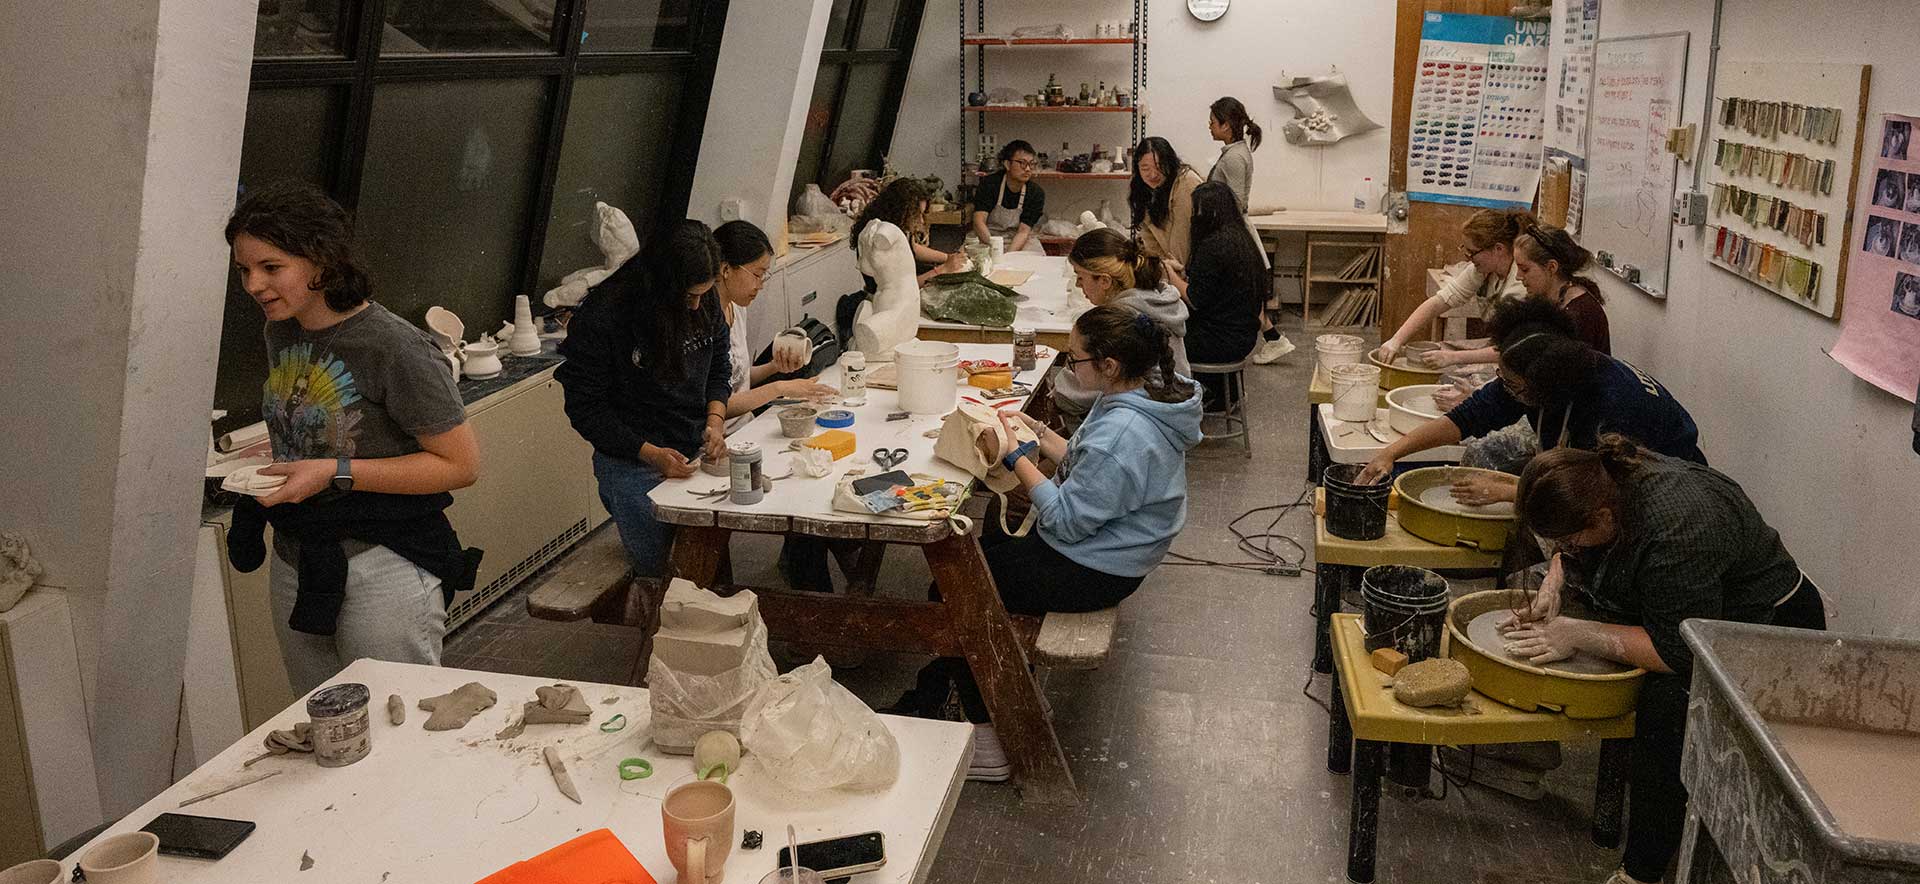 View of the Pottery Club in the studio